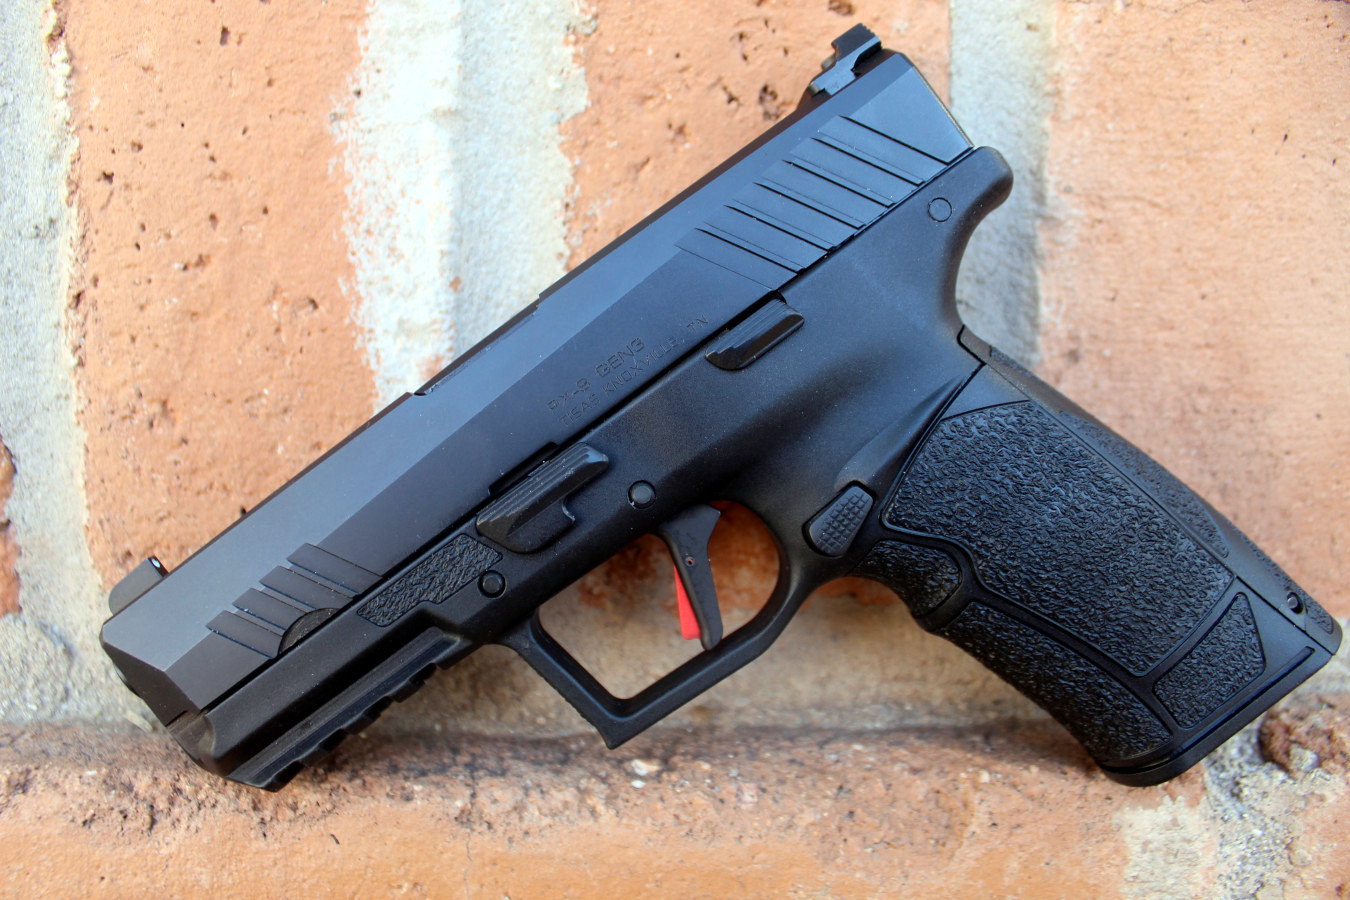 Tisas PX-9: The Best Turkey Has To Offer? [Hands-On Review] | RECOIL